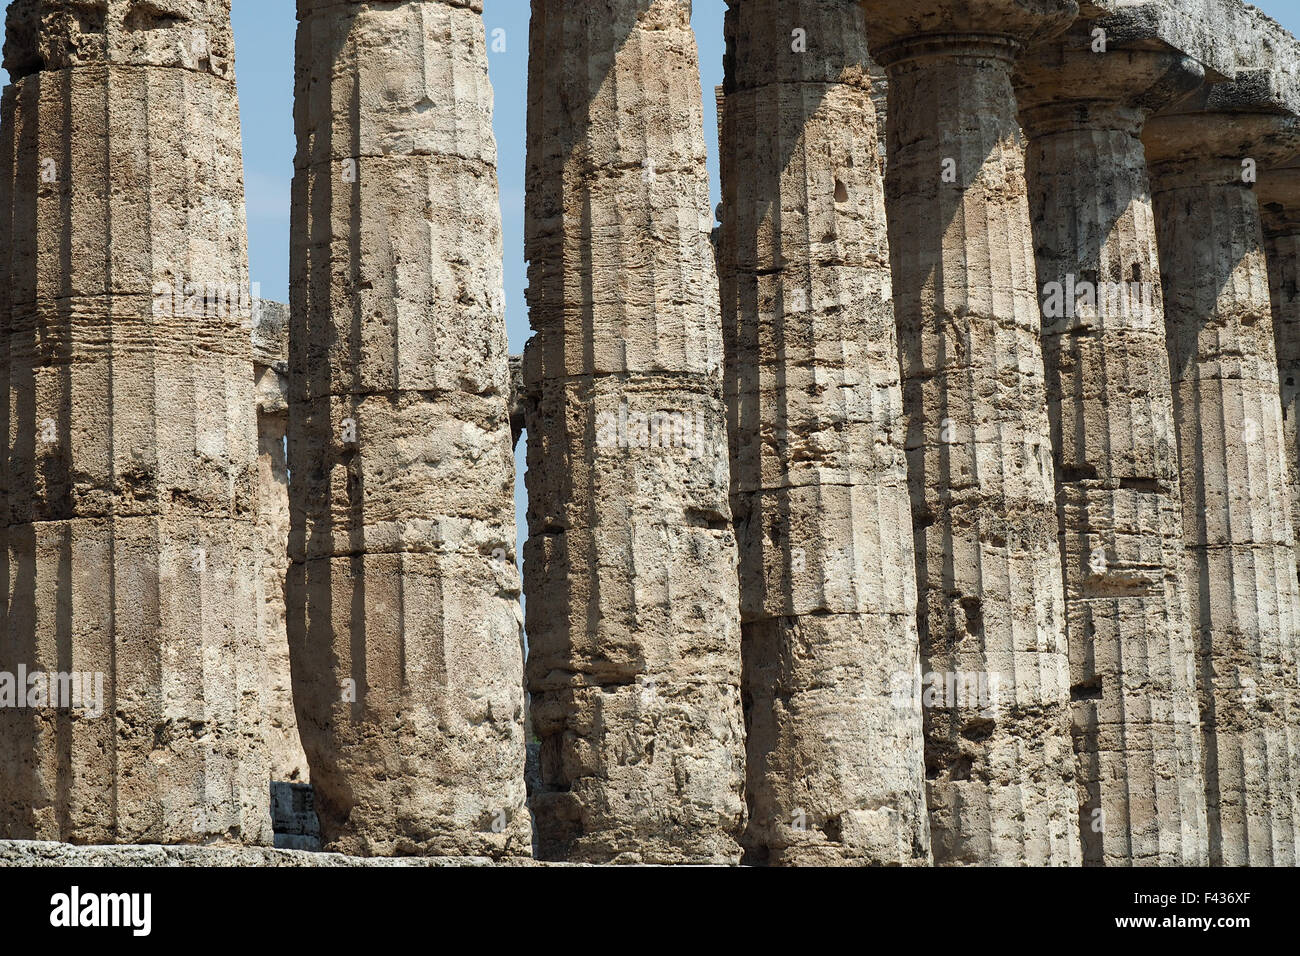 Doric columns of the Temple of Athena or Temple of Ceres, Paestum. Stock Photo